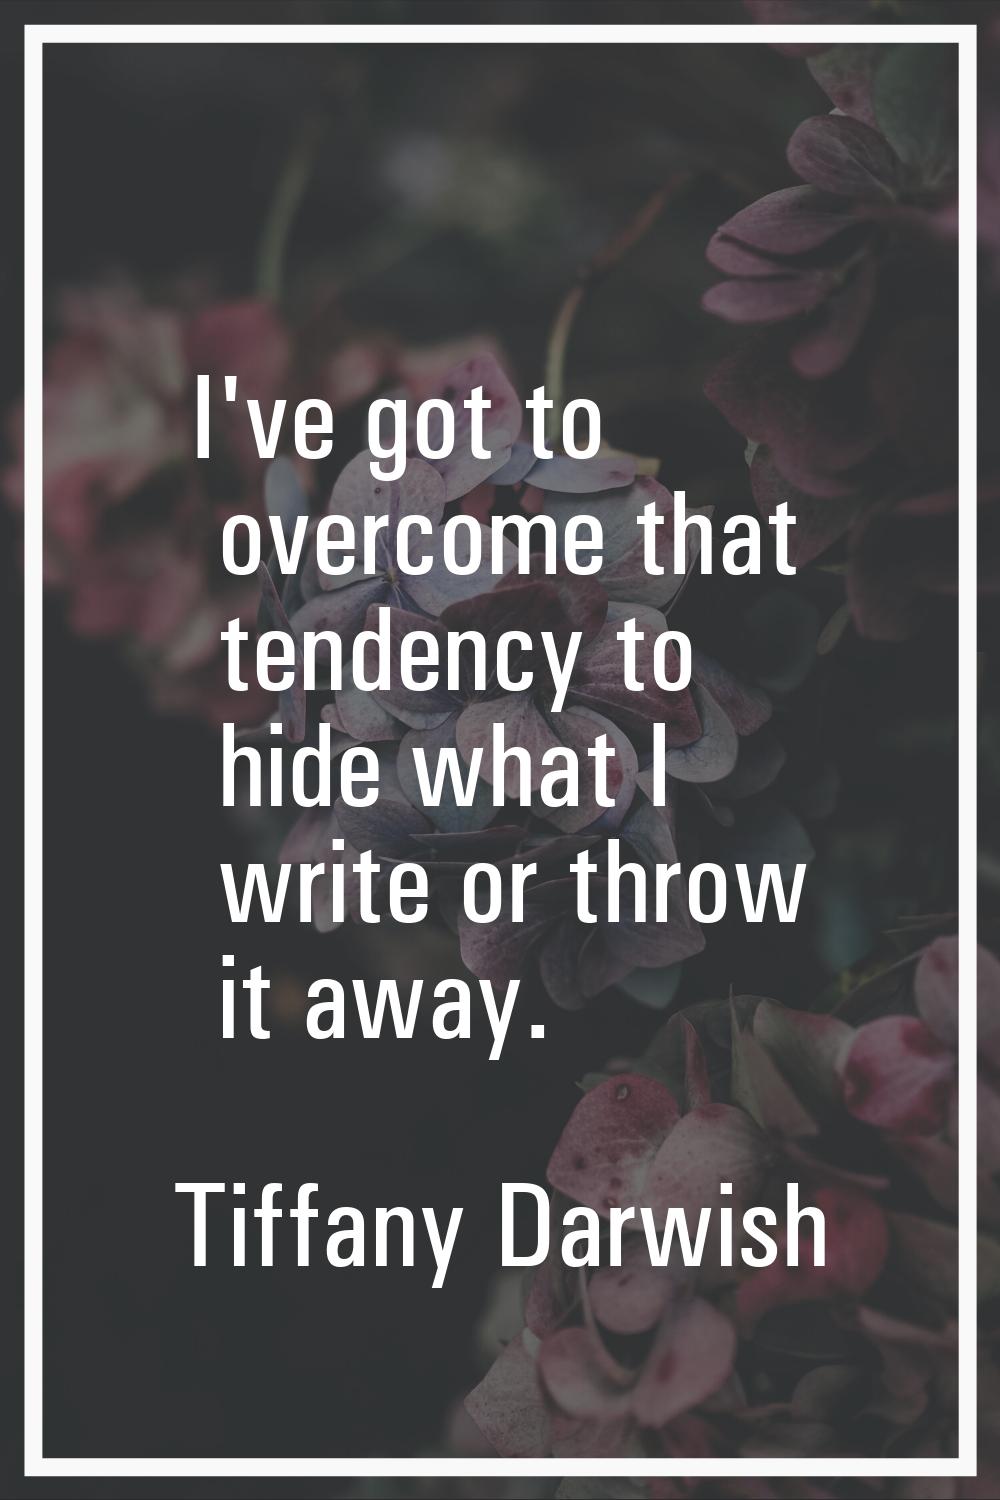 I've got to overcome that tendency to hide what I write or throw it away.